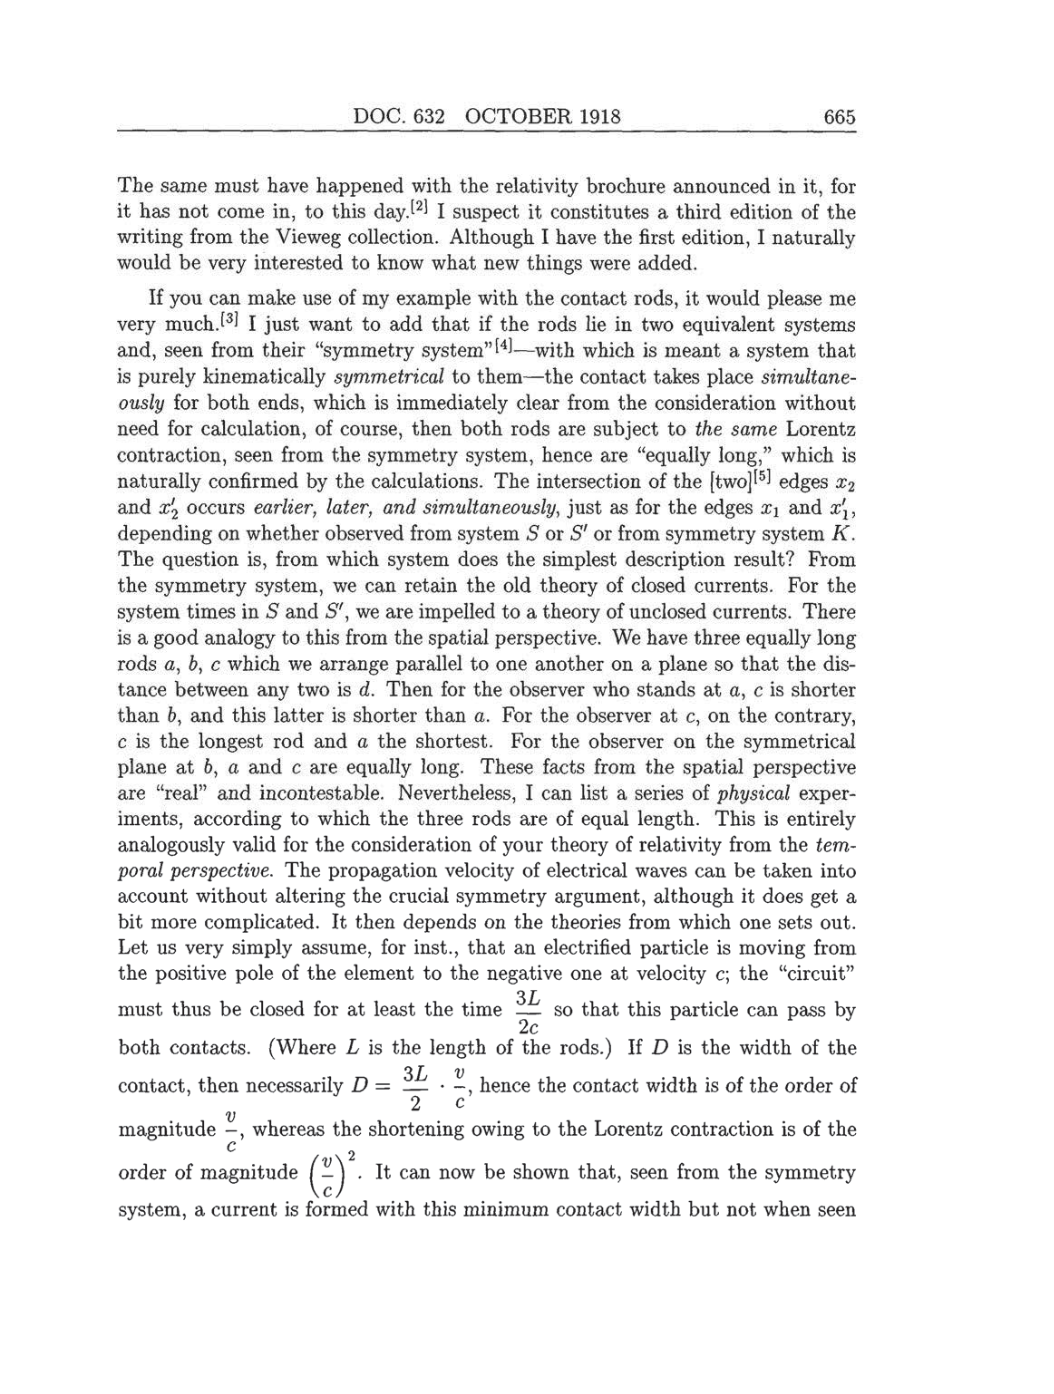 Volume 8: The Berlin Years: Correspondence, 1914-1918 (English translation supplement) page 665